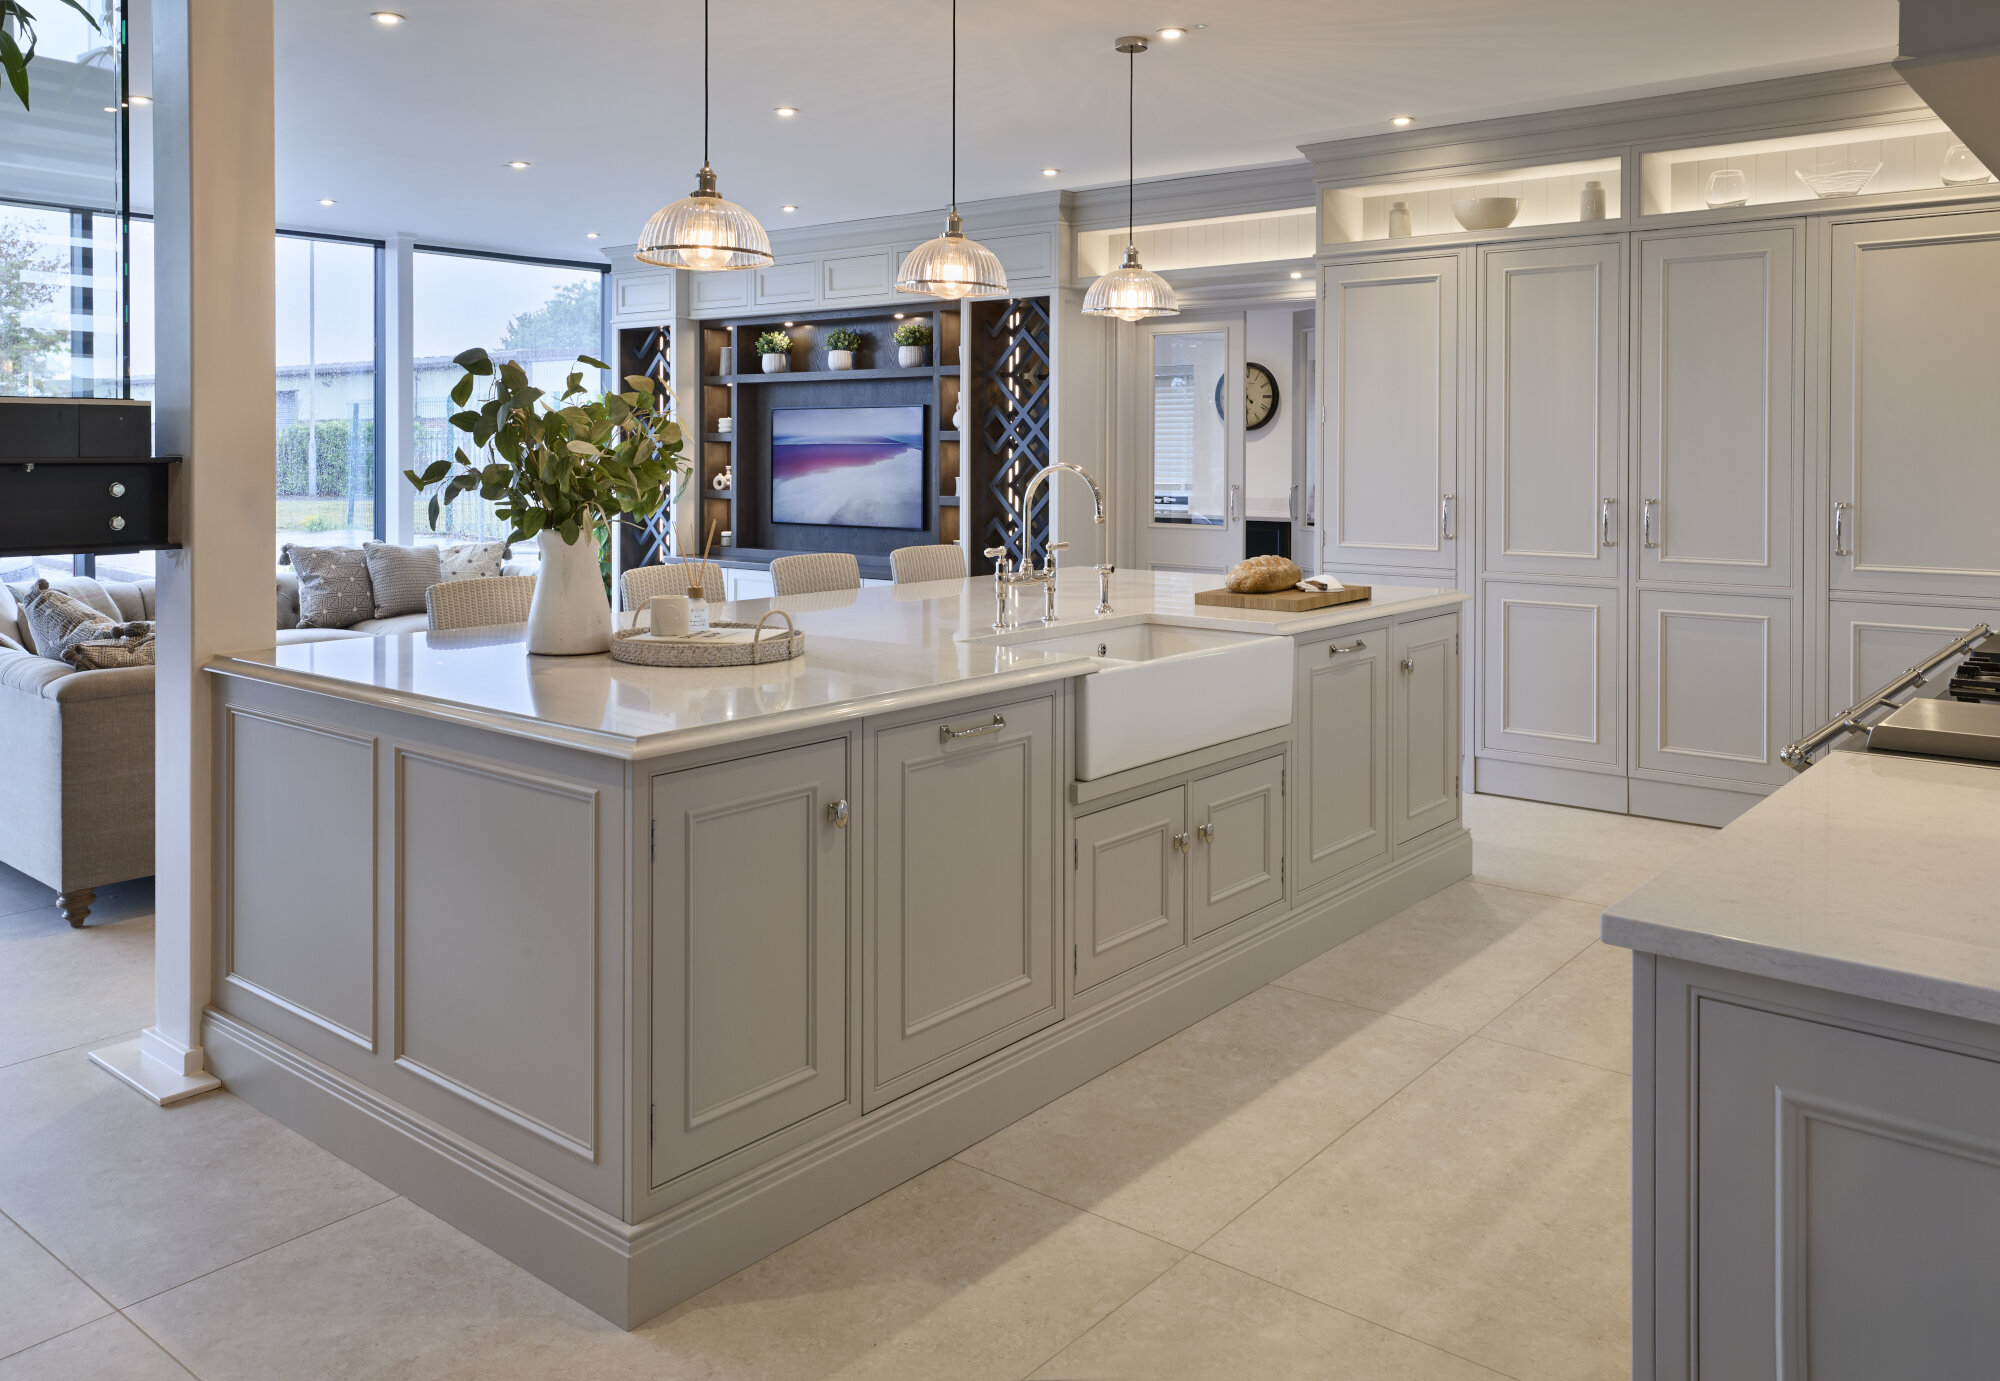 This Bespoke Kitchen Design is on display in our showroom near Shepshed